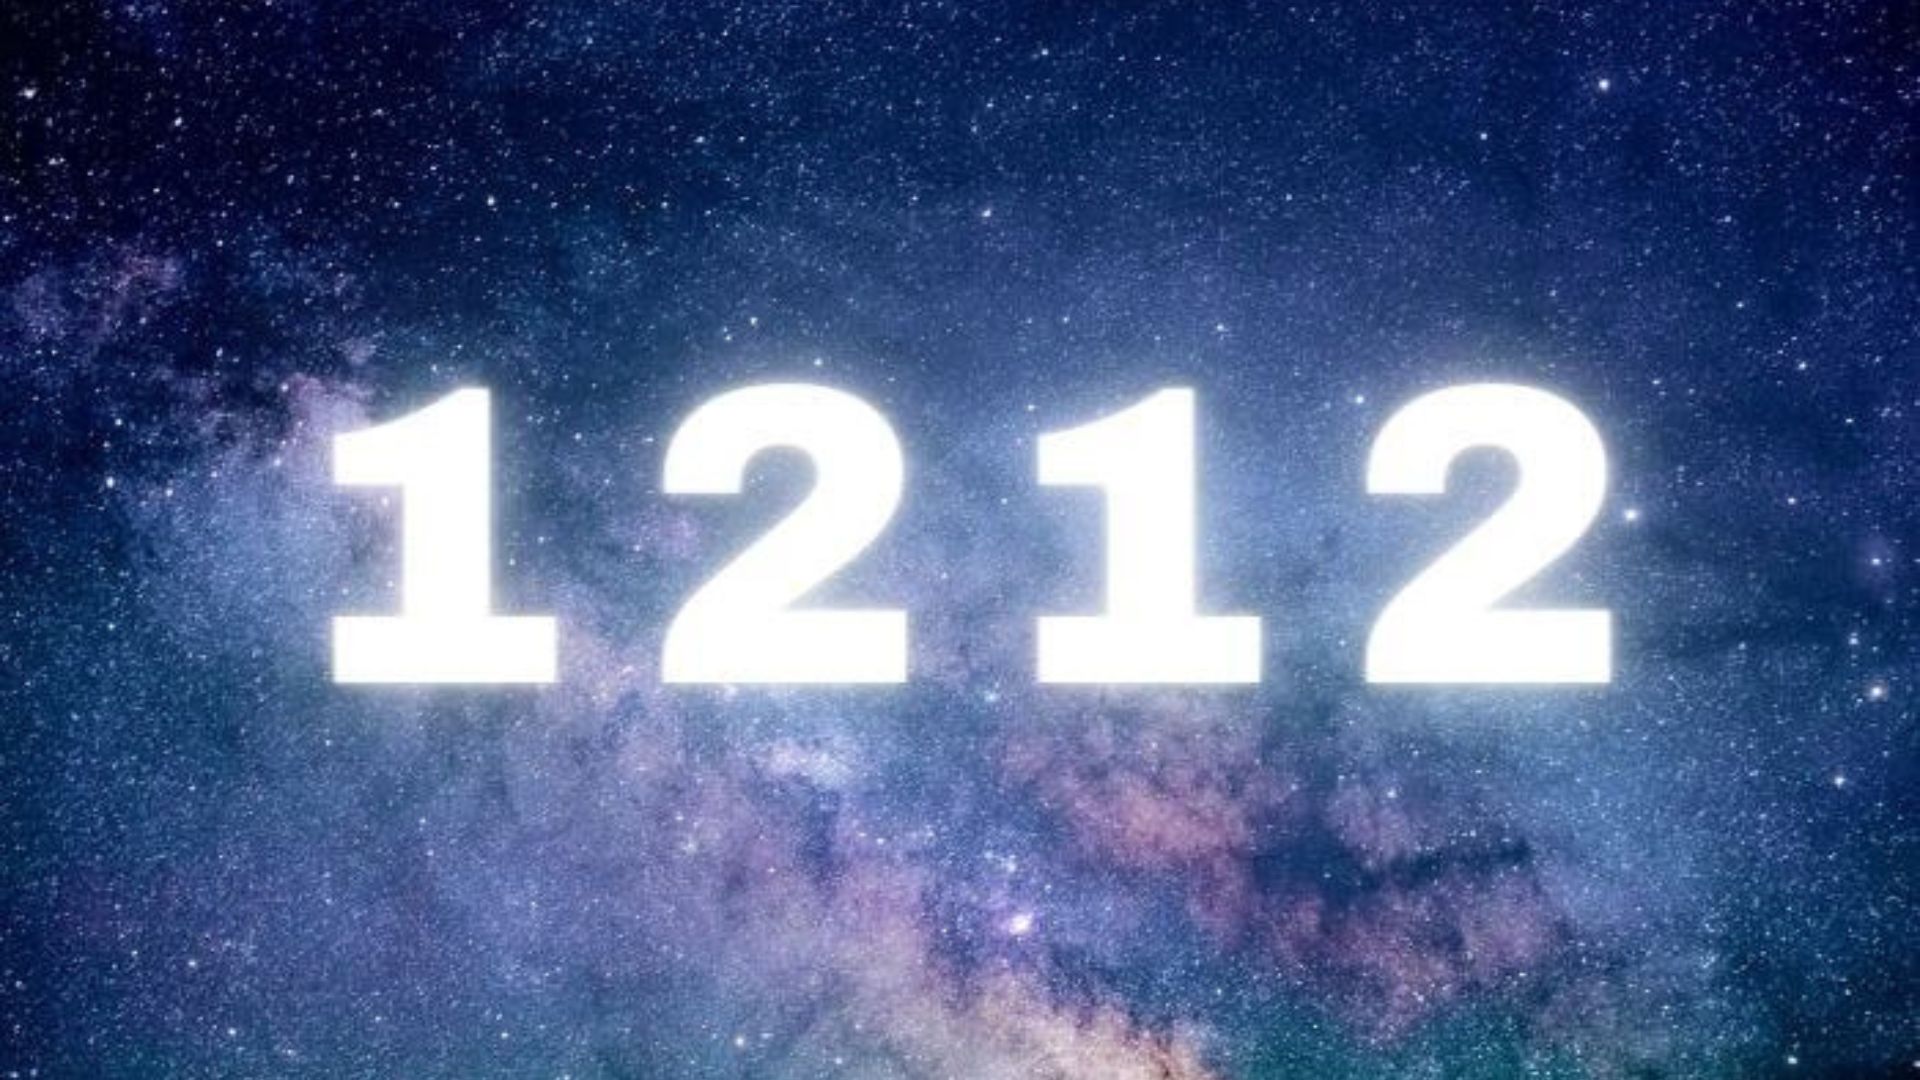 What Does 1212 Mean Spiritually?